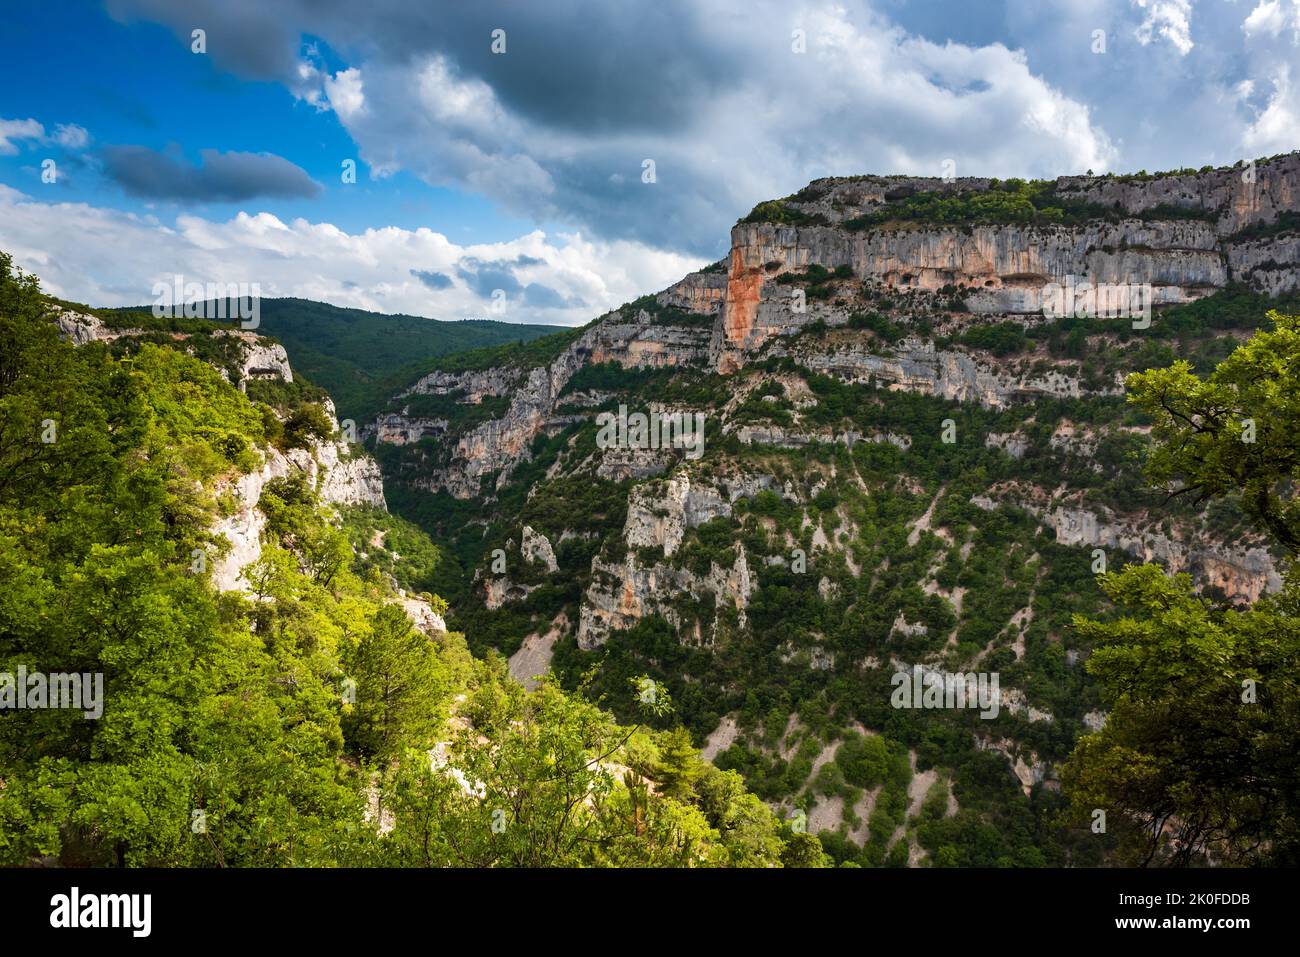 Nesque canyon and the Cire rock in Vaucluse, France Stock Photo